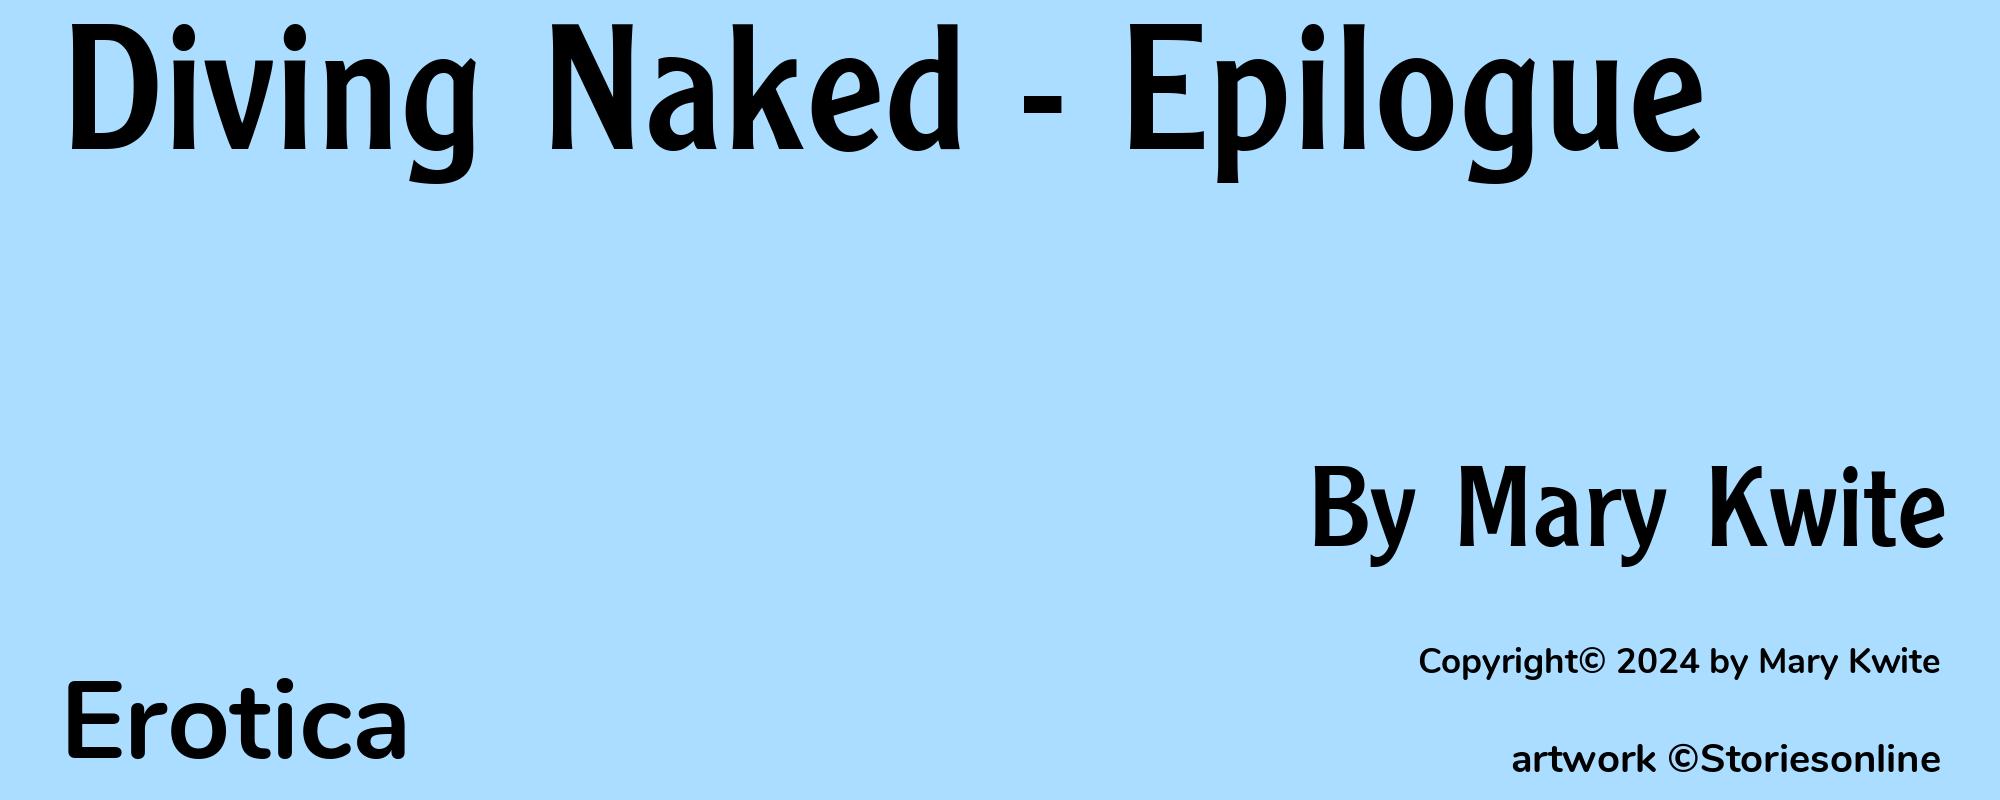 Diving Naked - Epilogue - Cover